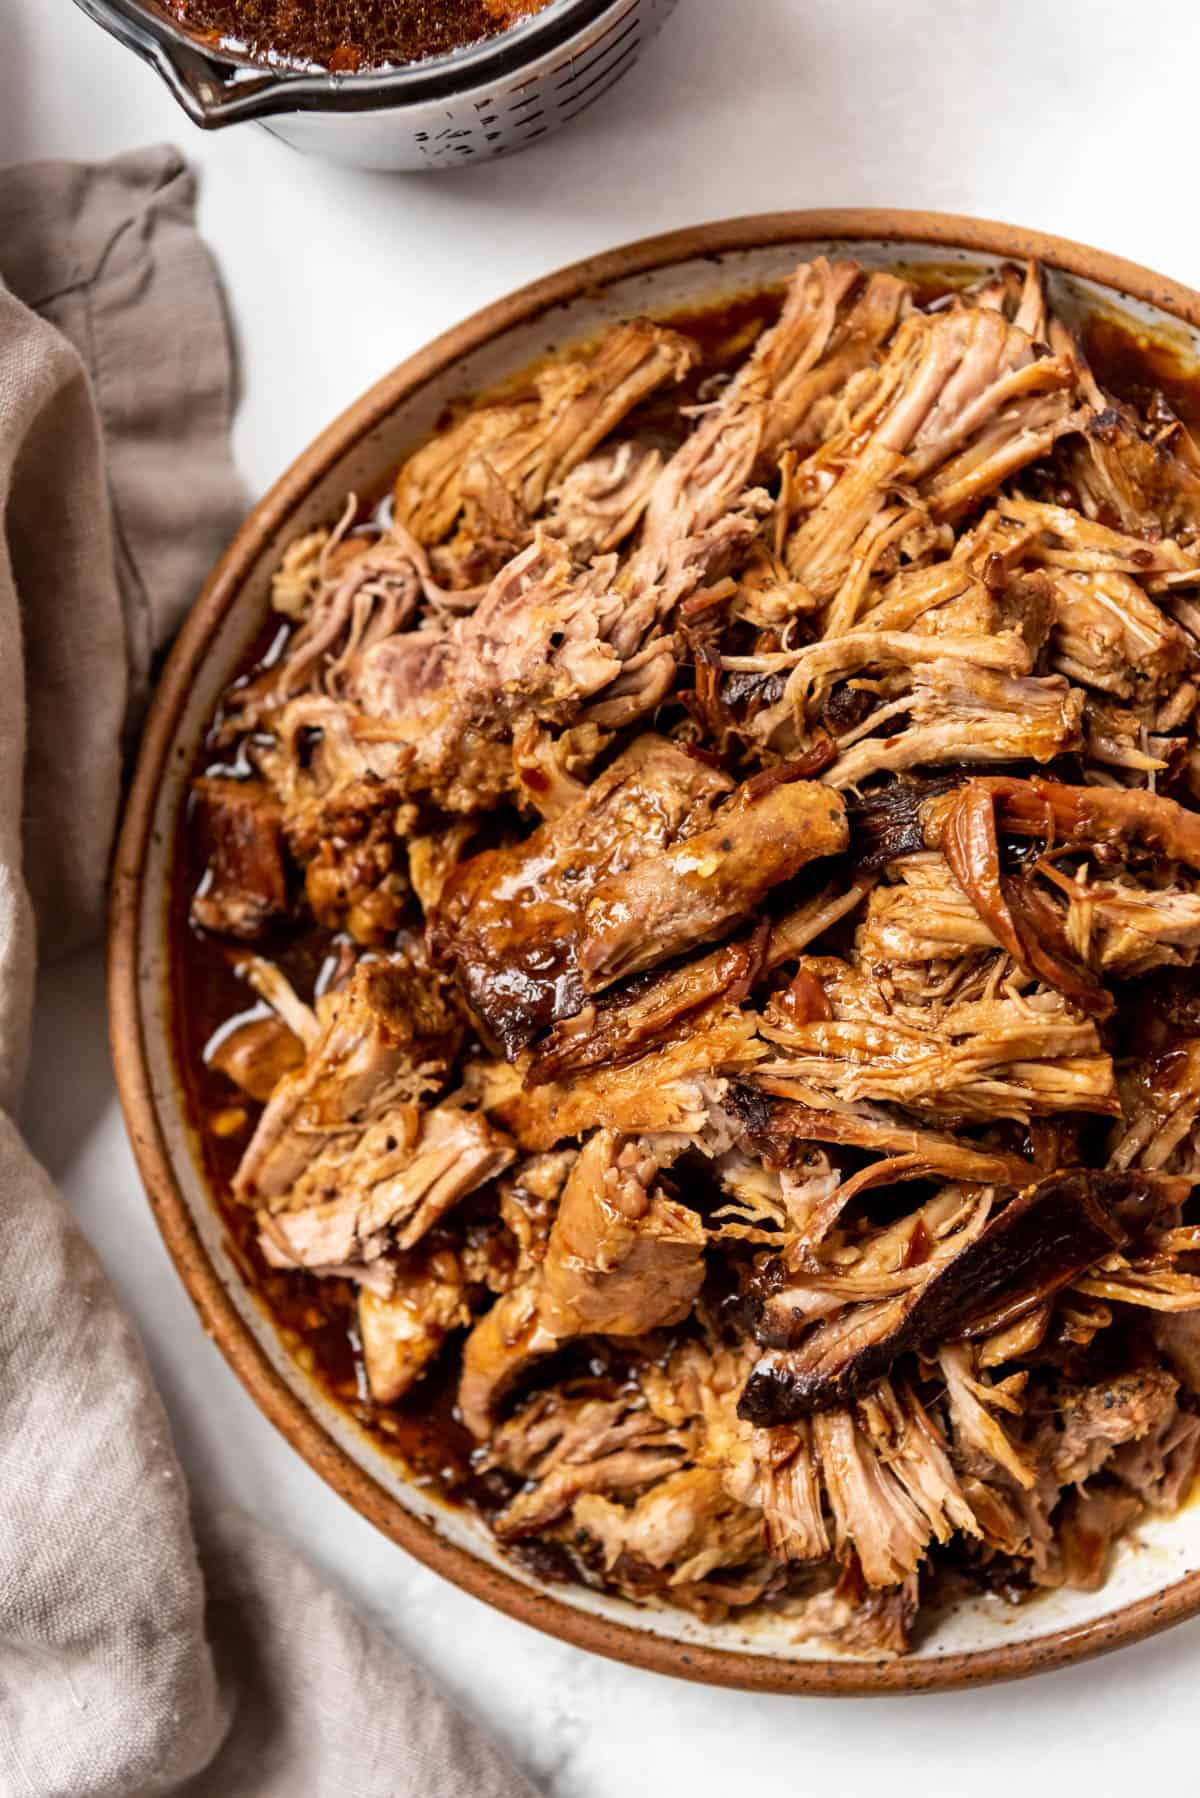 A close image of shredded pork roast that has been made in the Instant Pot.